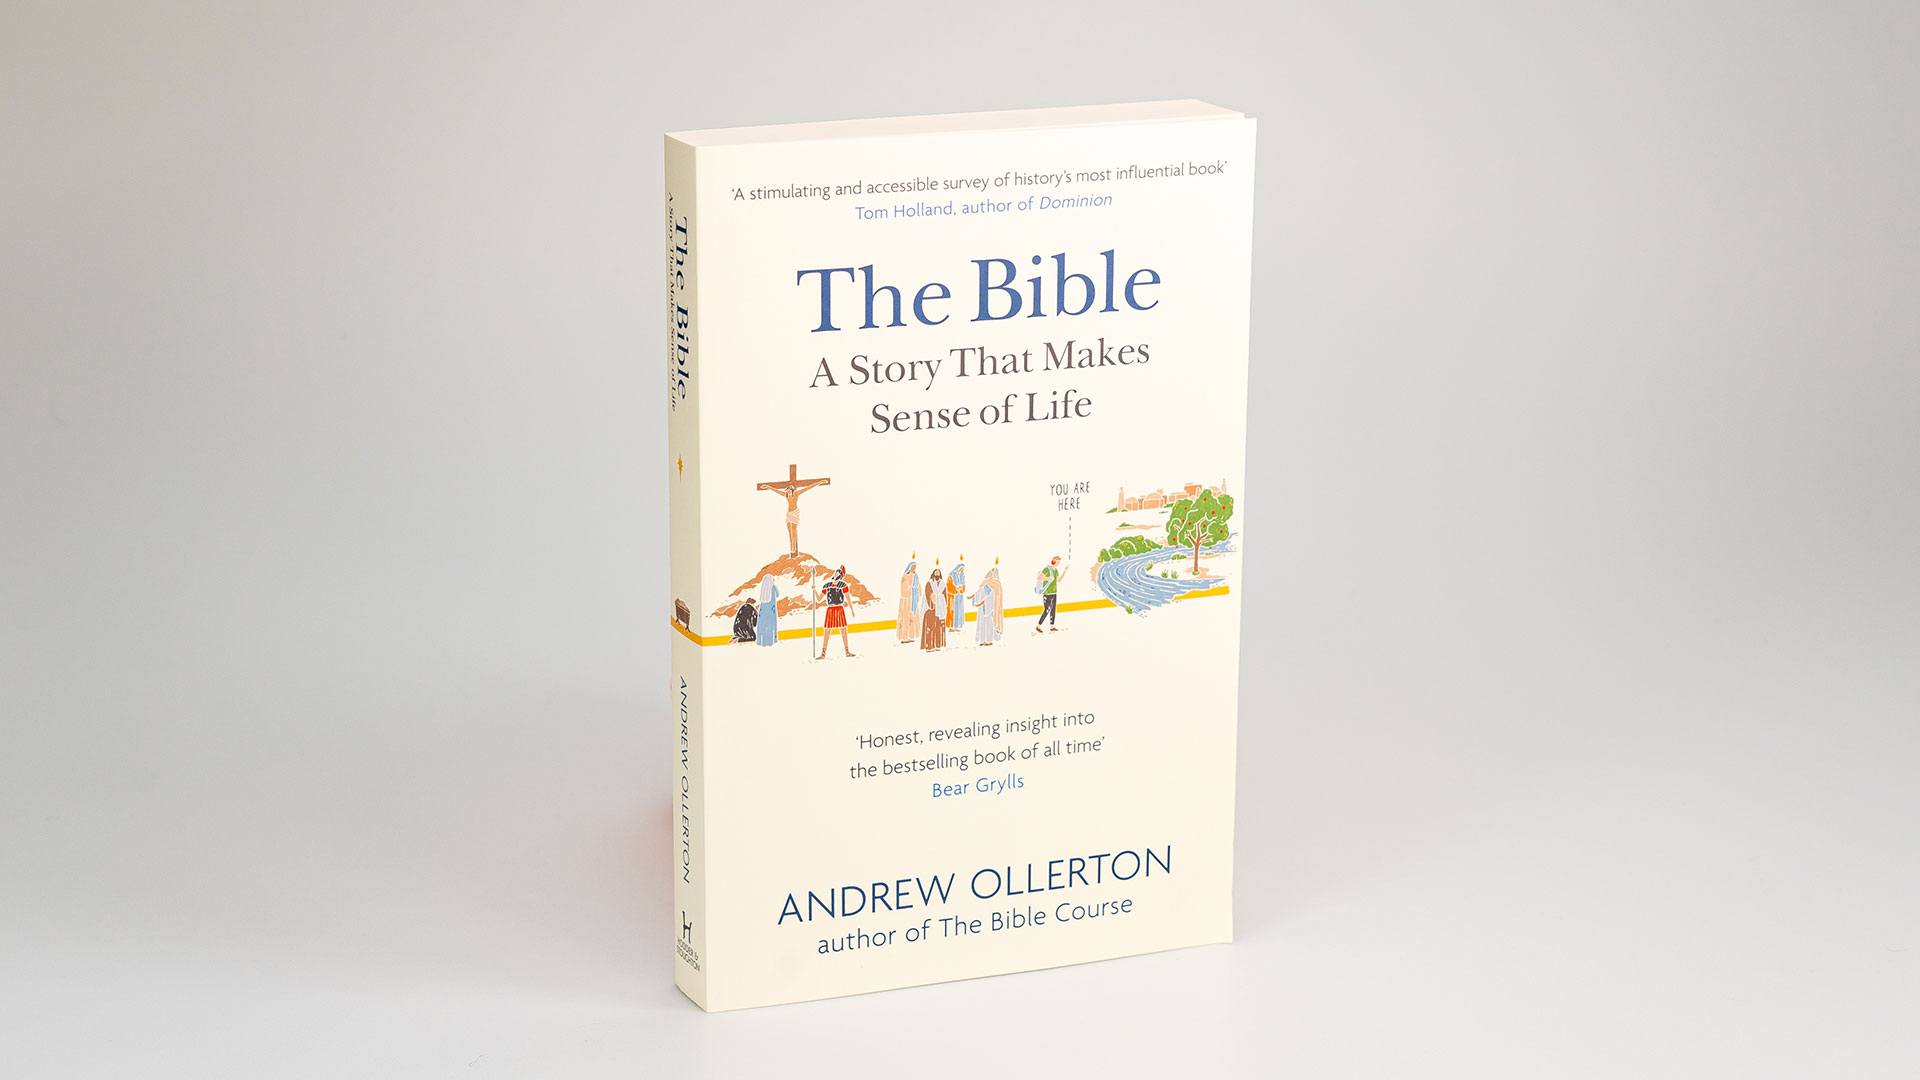 The Bible: A Story That Makes Sense of Life